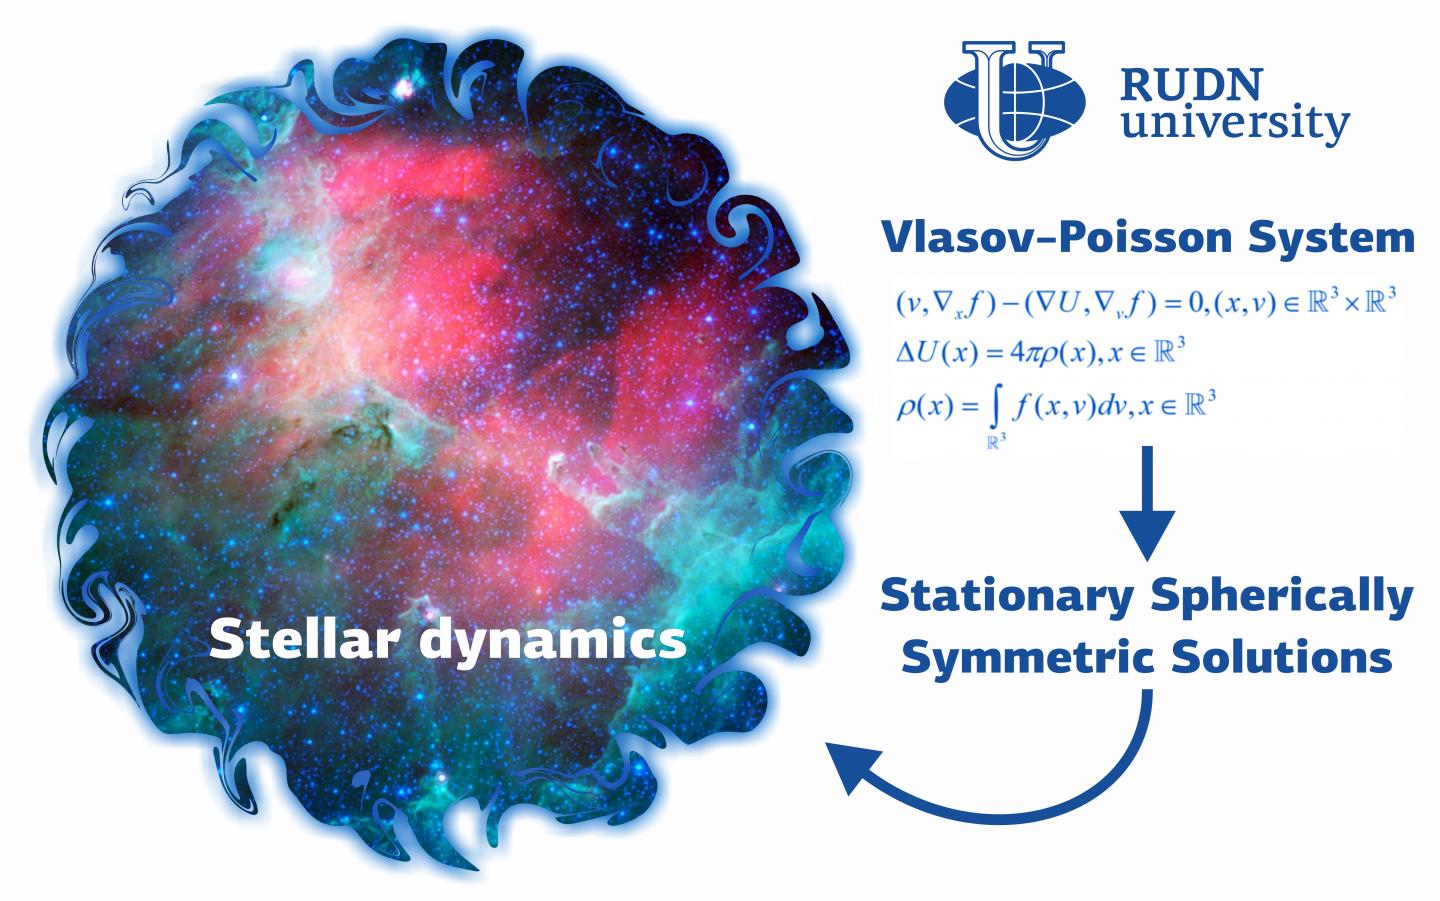 Mathematics Developed New Classes of Stellar Dynamics Systems Solutions